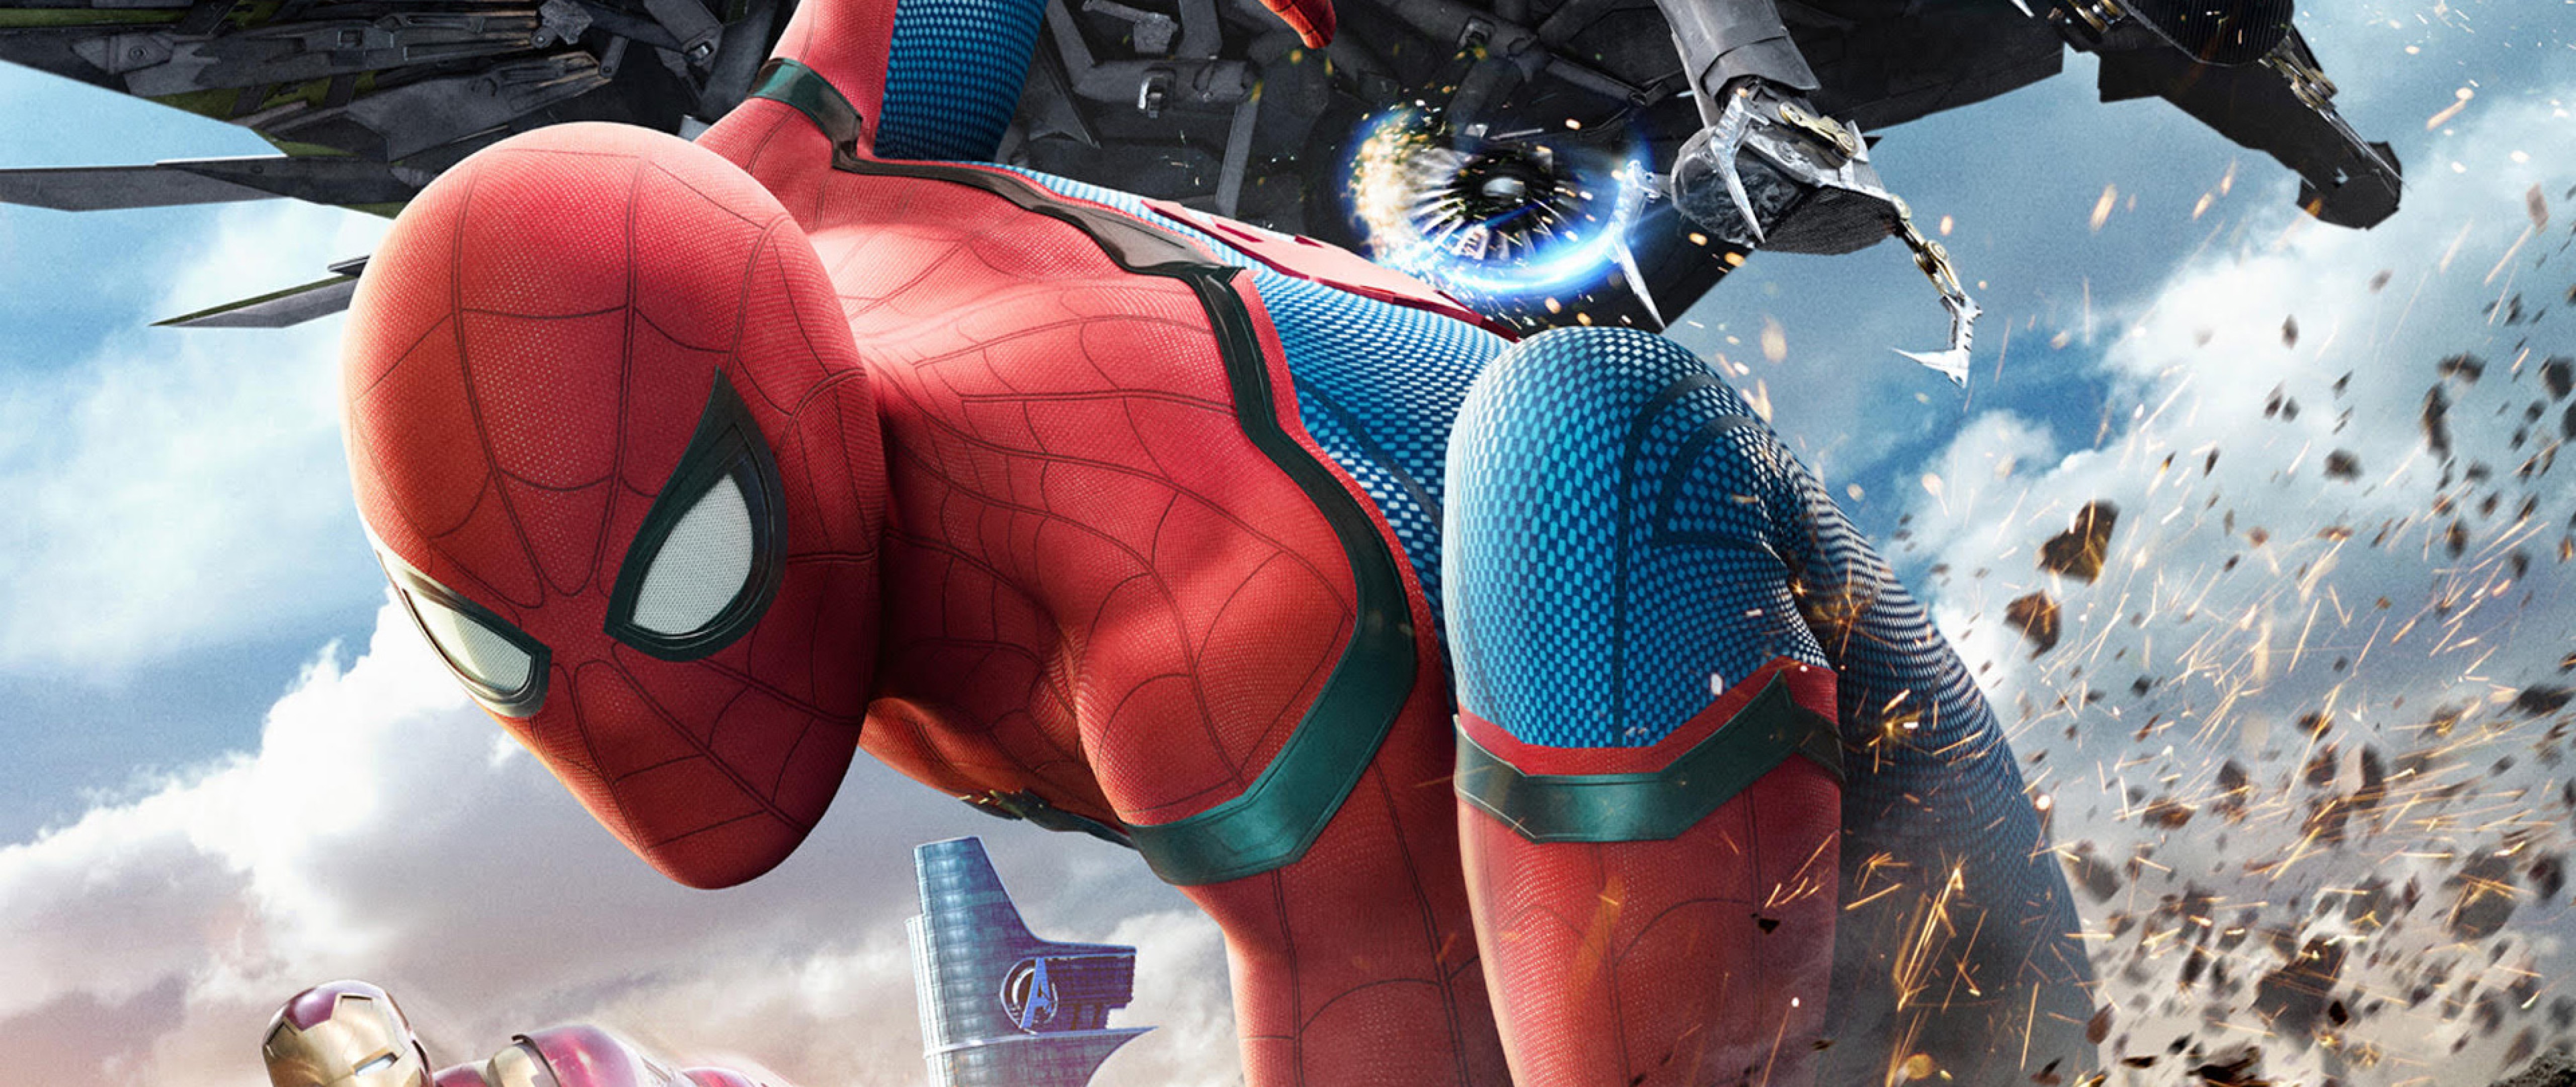 Spider-Man: Homecoming for windows download free